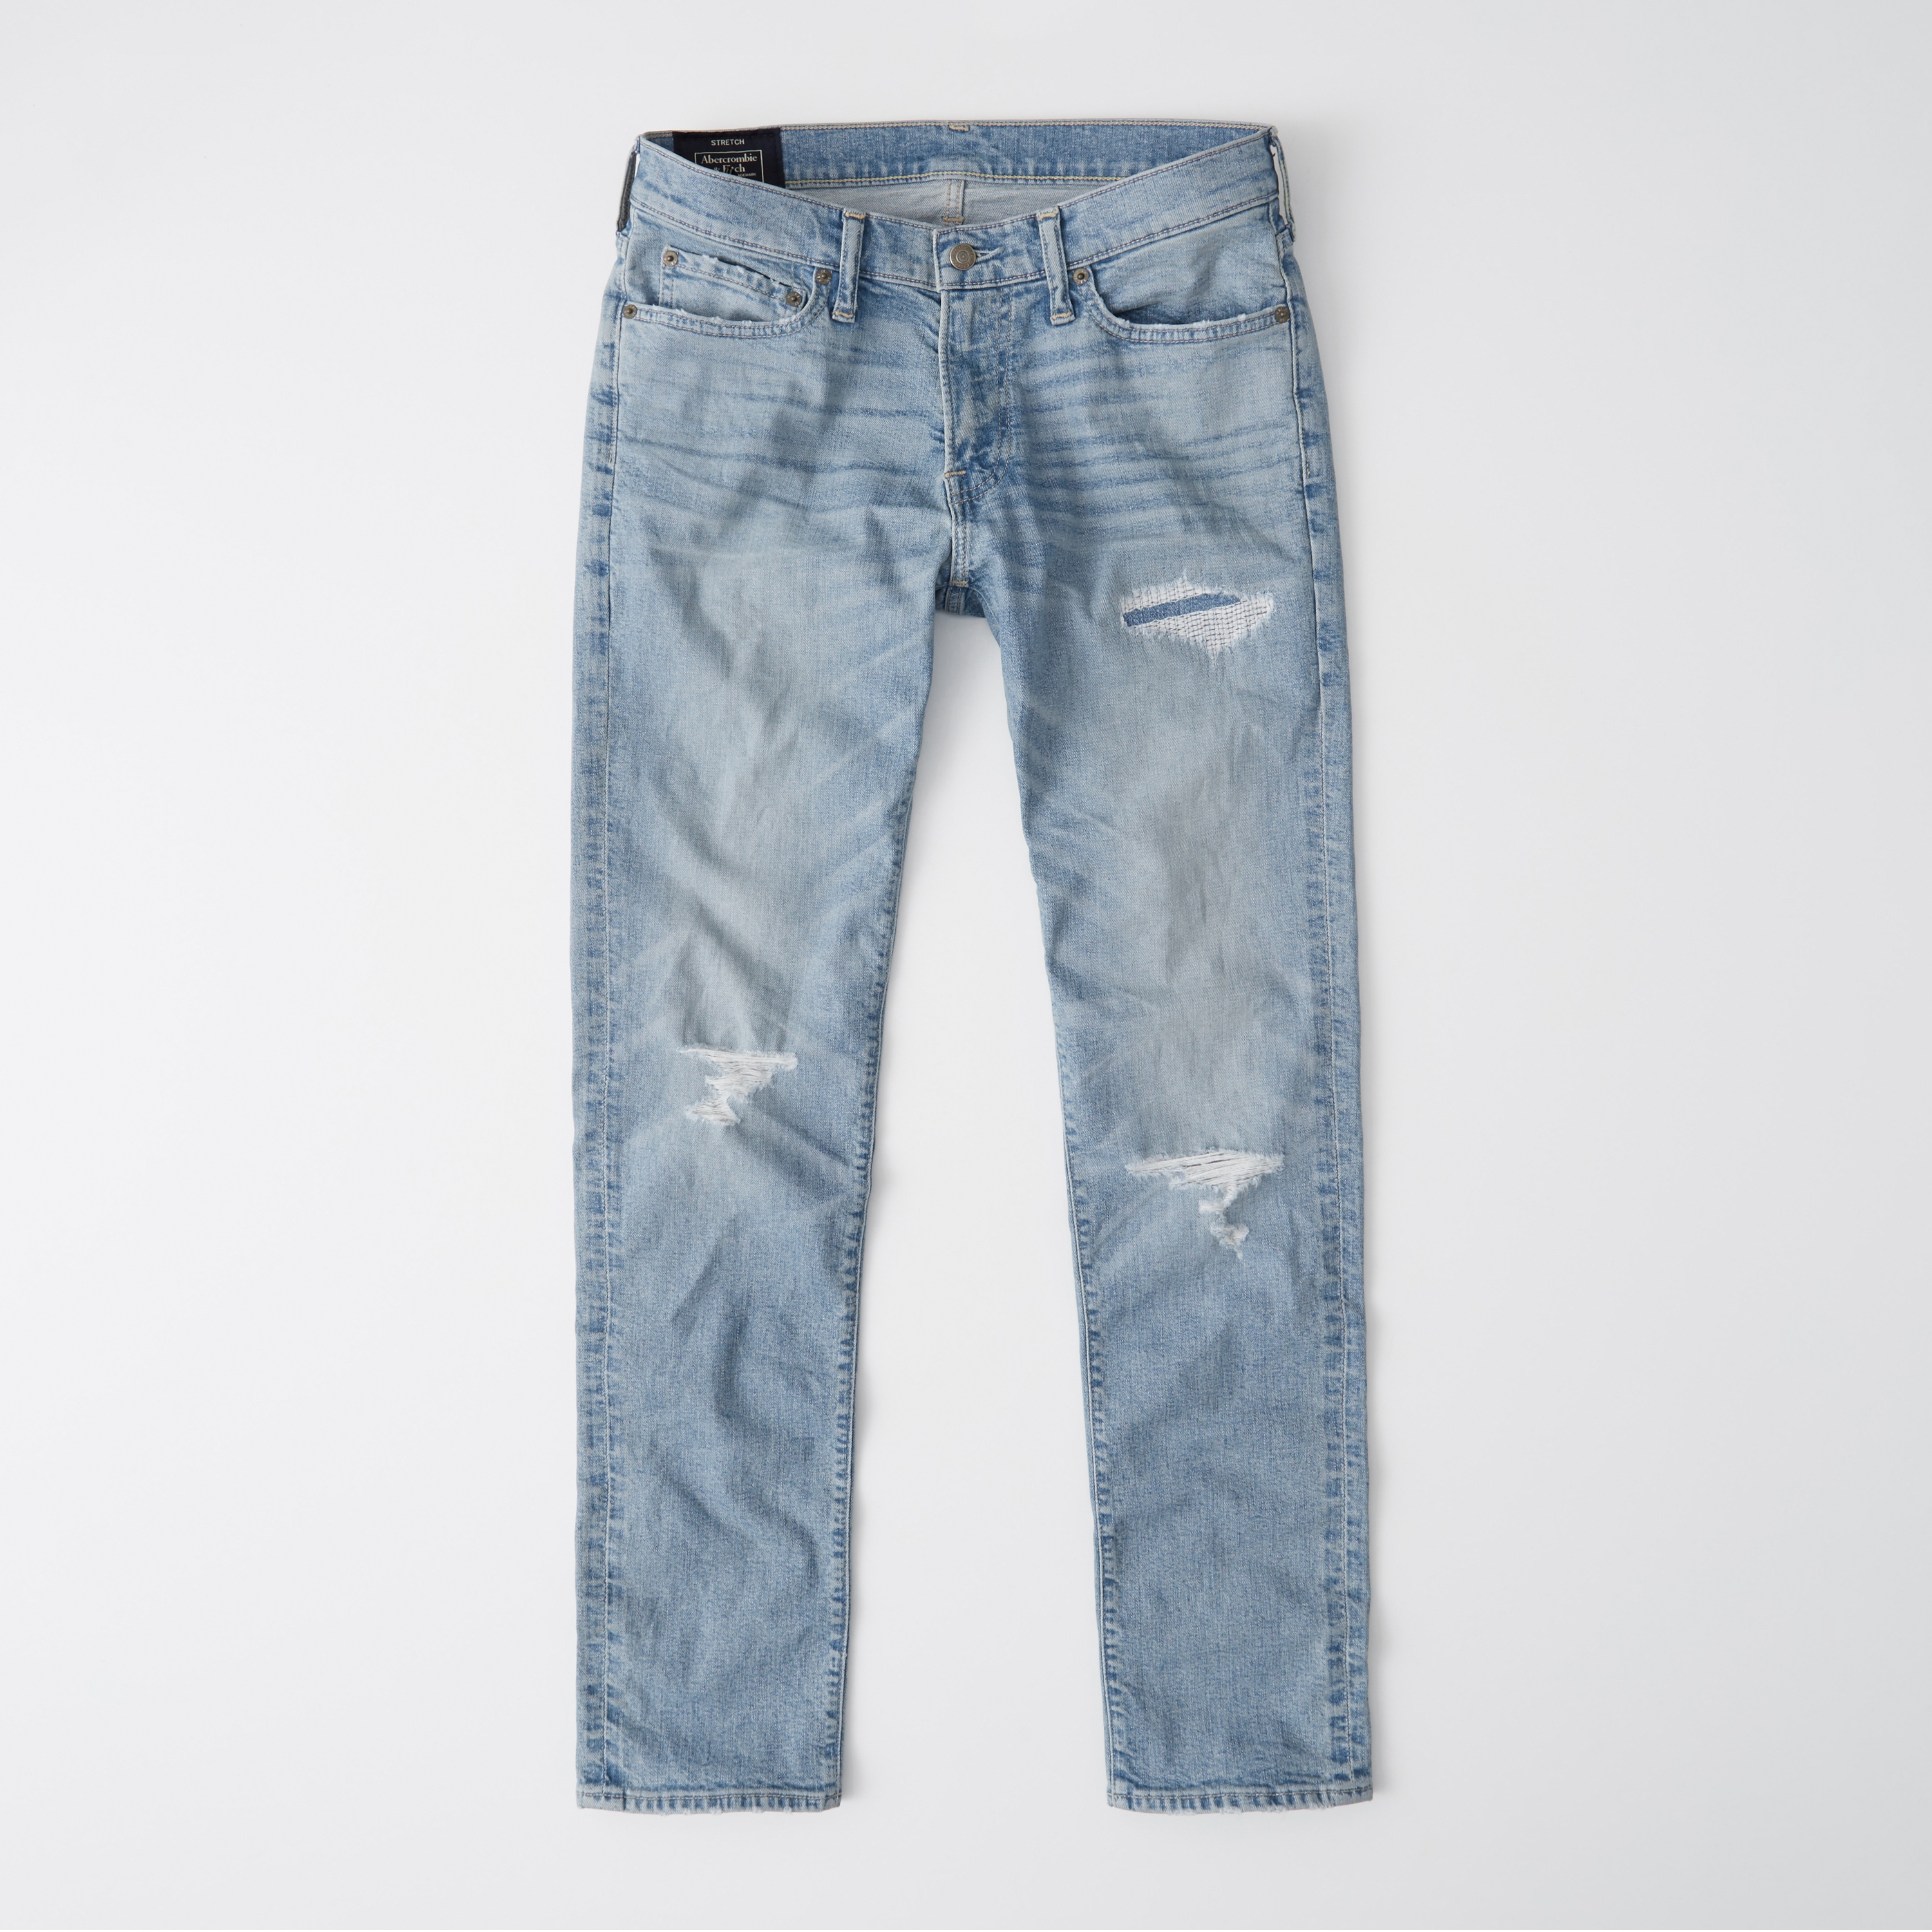 a&f clearance jeans